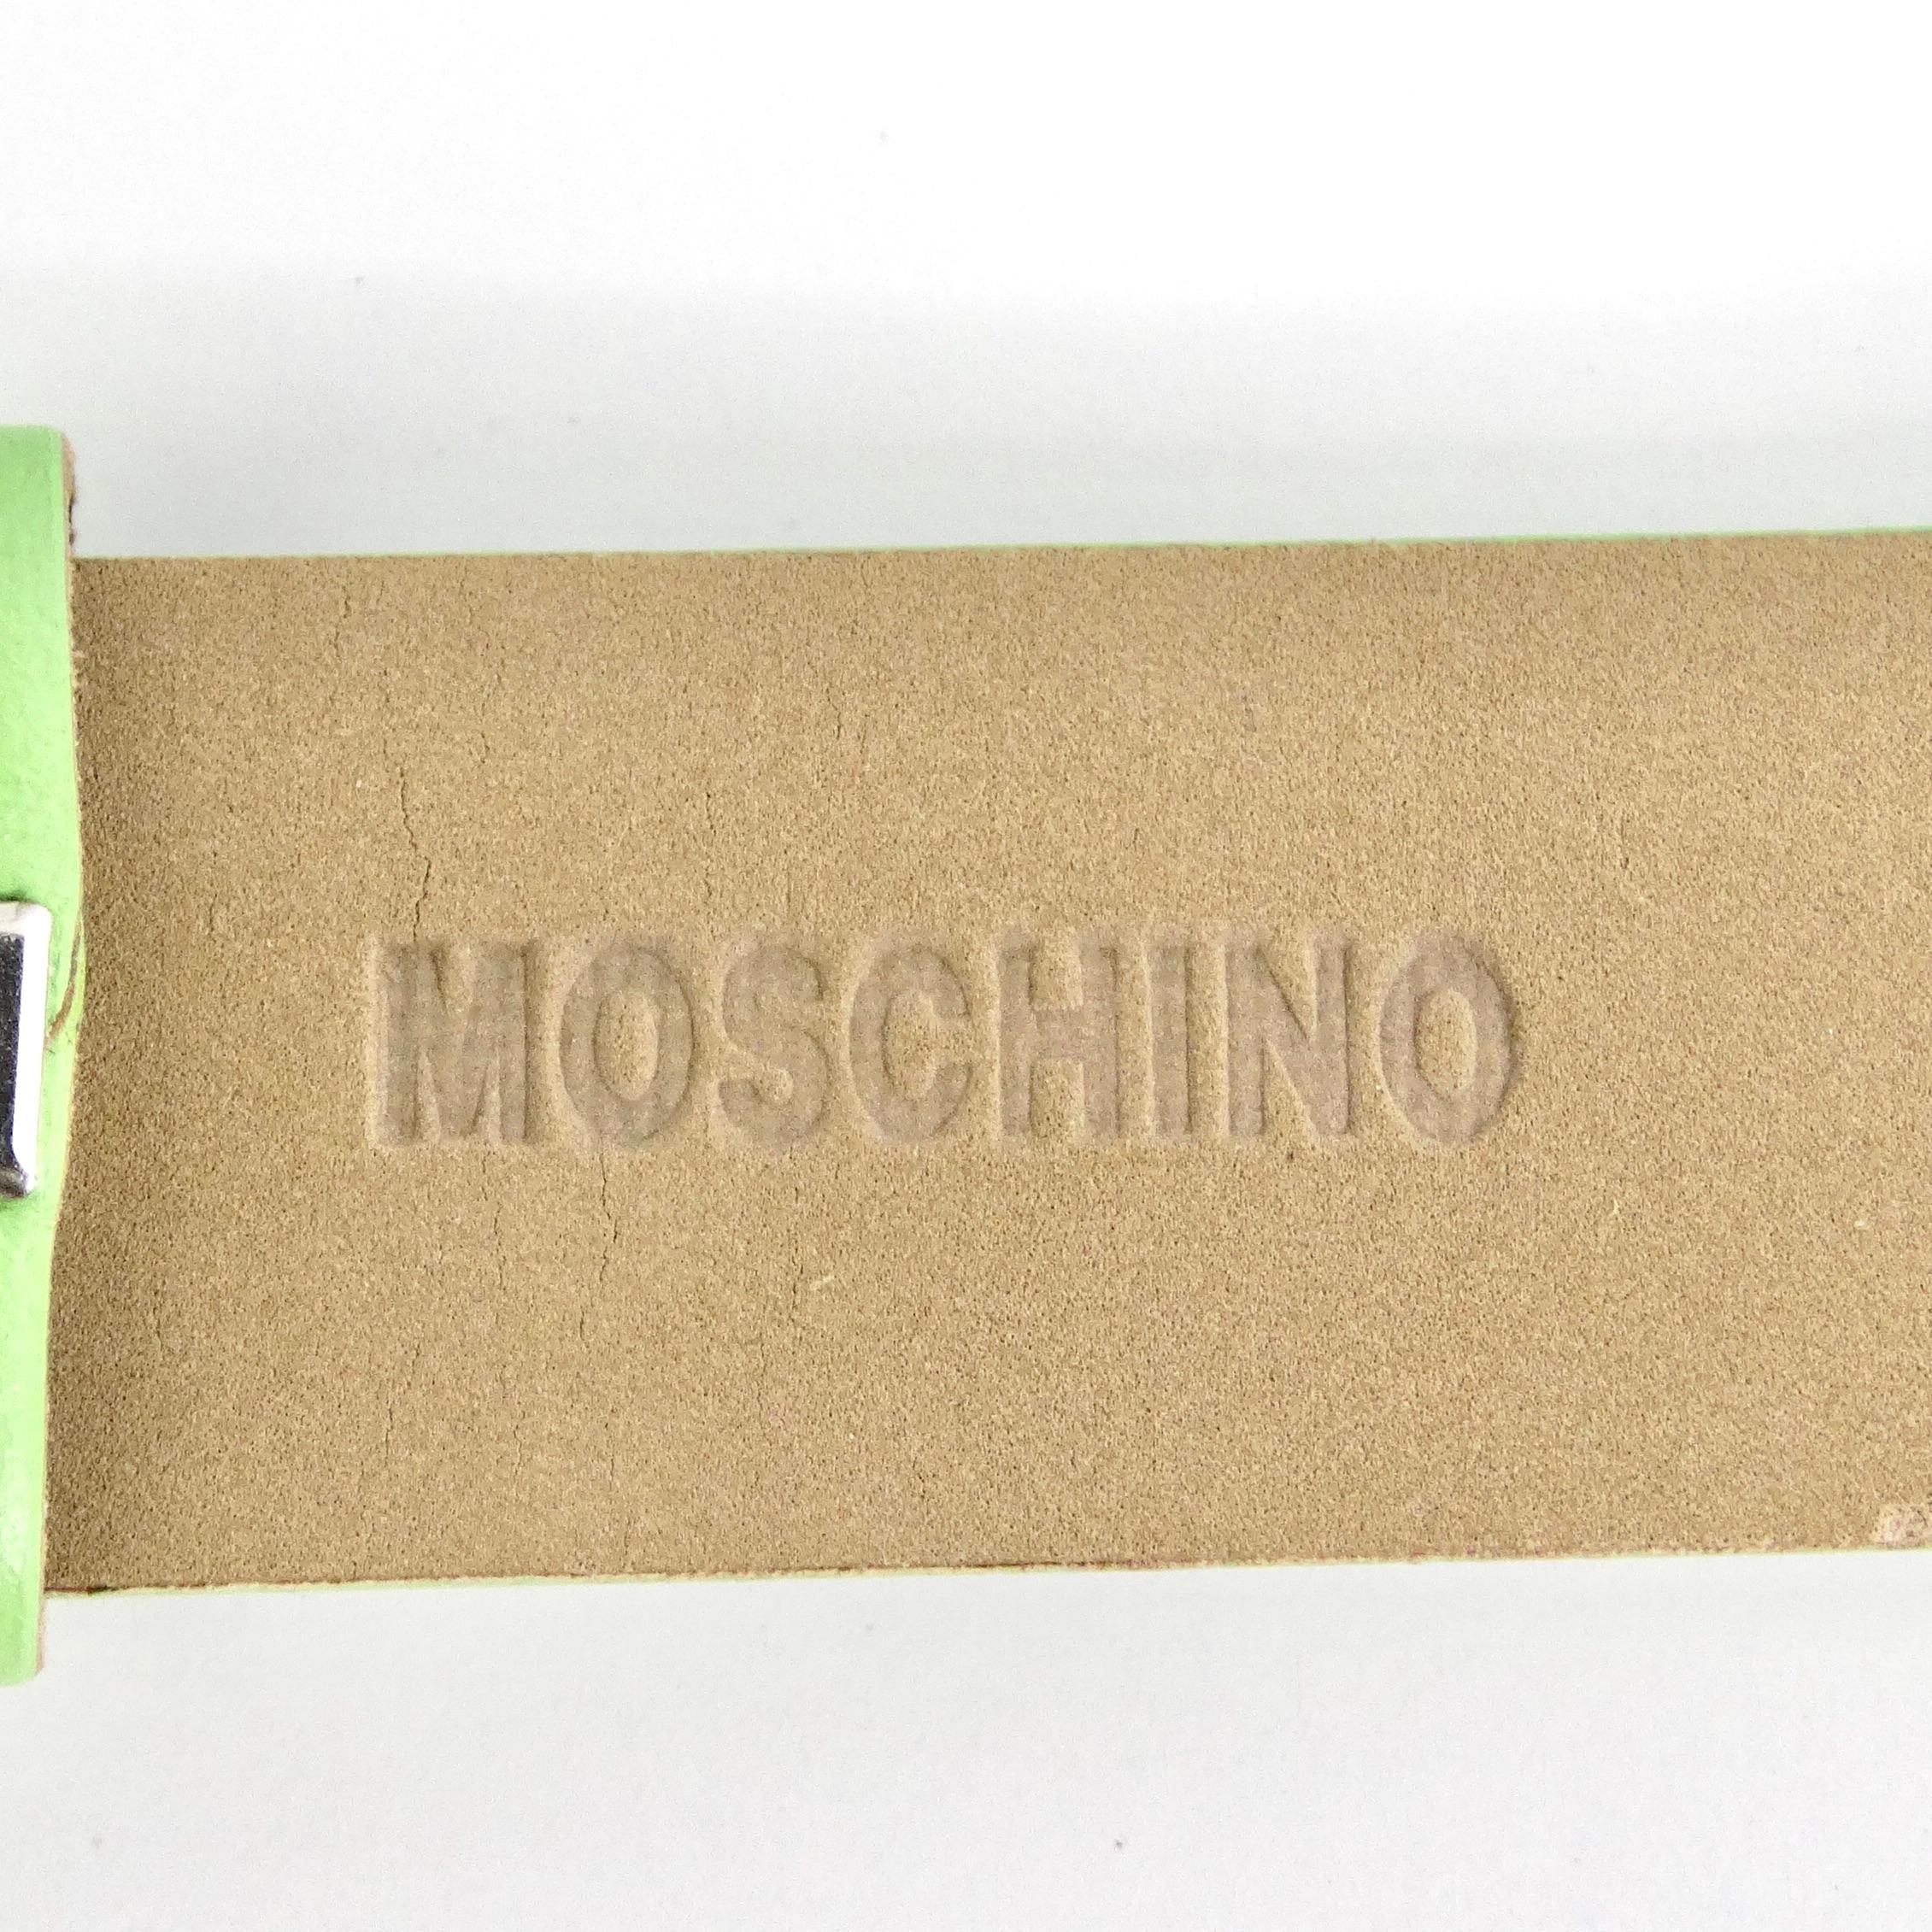 Moschino 1980s Green Leather Watch For Sale 4